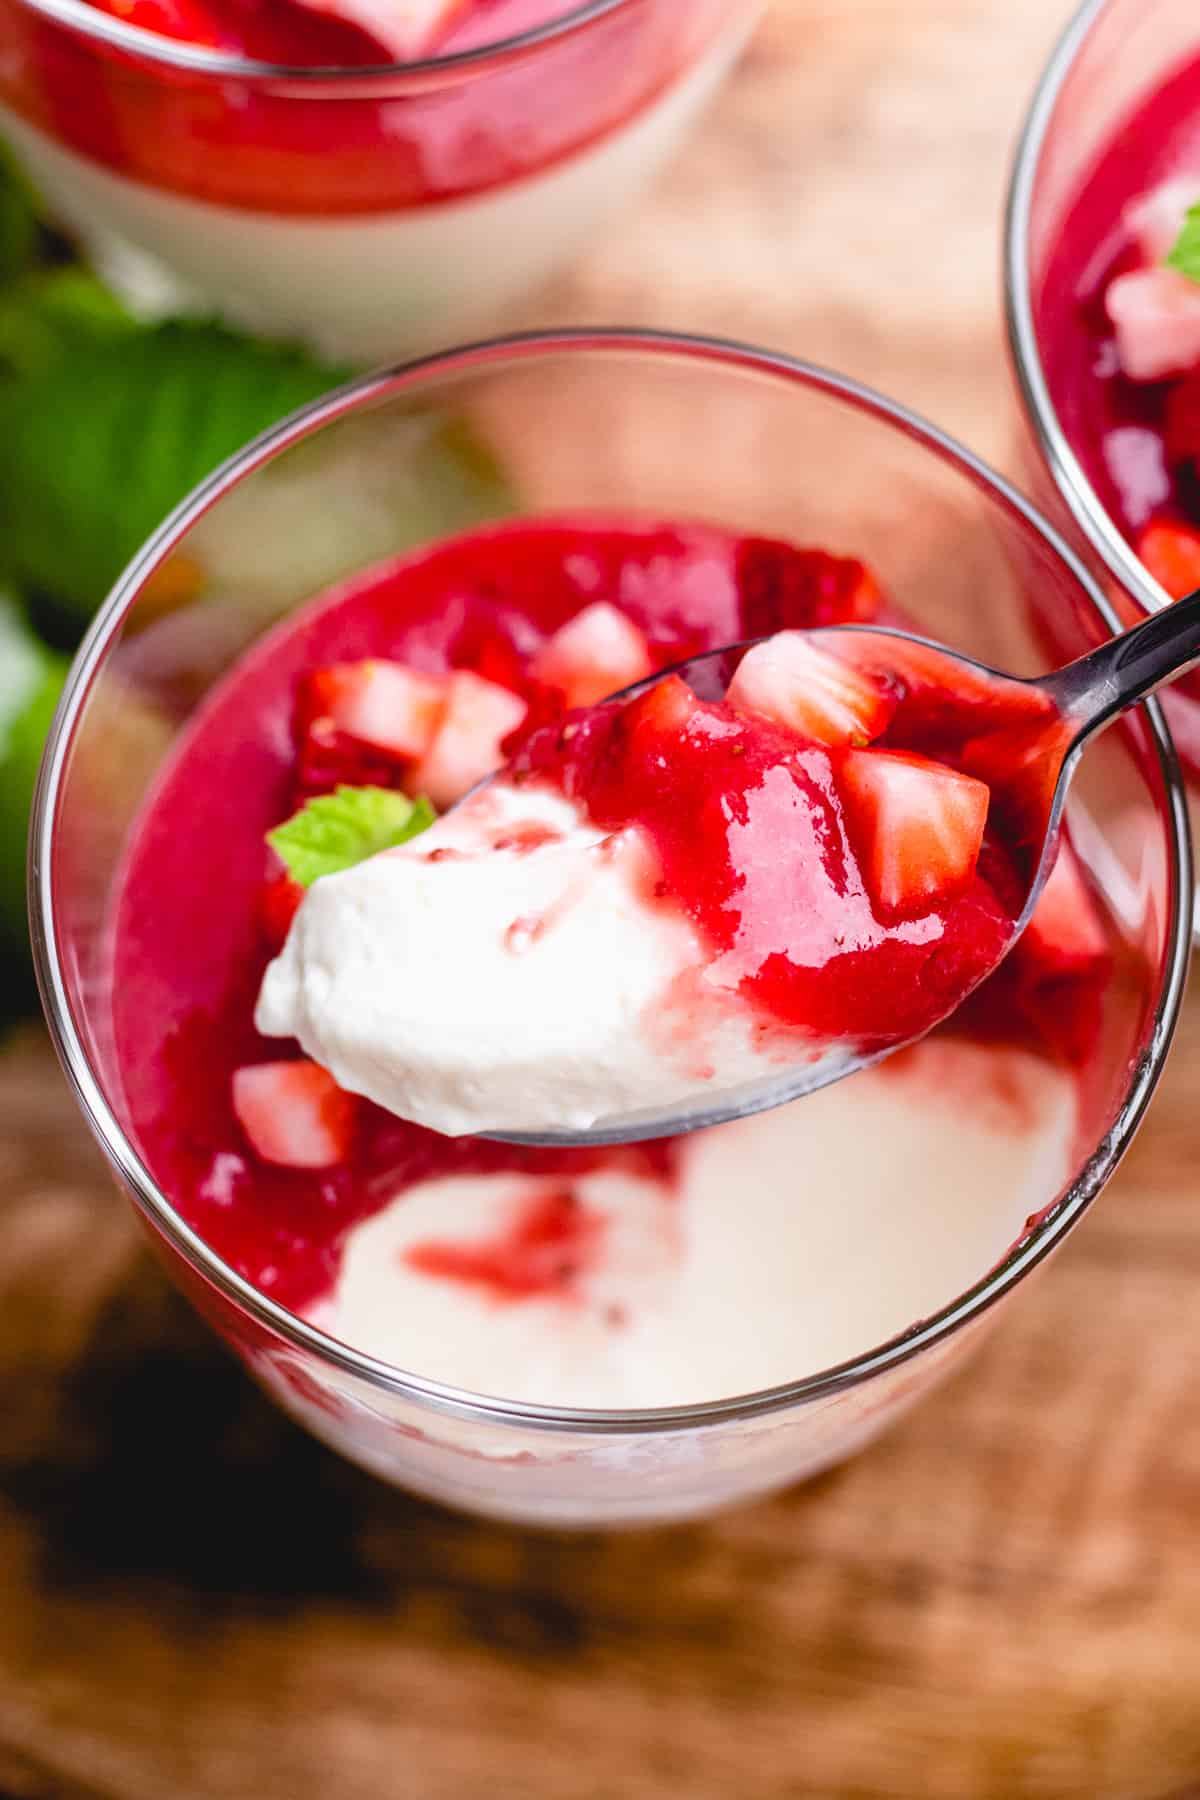 Scooping out panna cotta with strawberry sauce with a spoon from a glass.